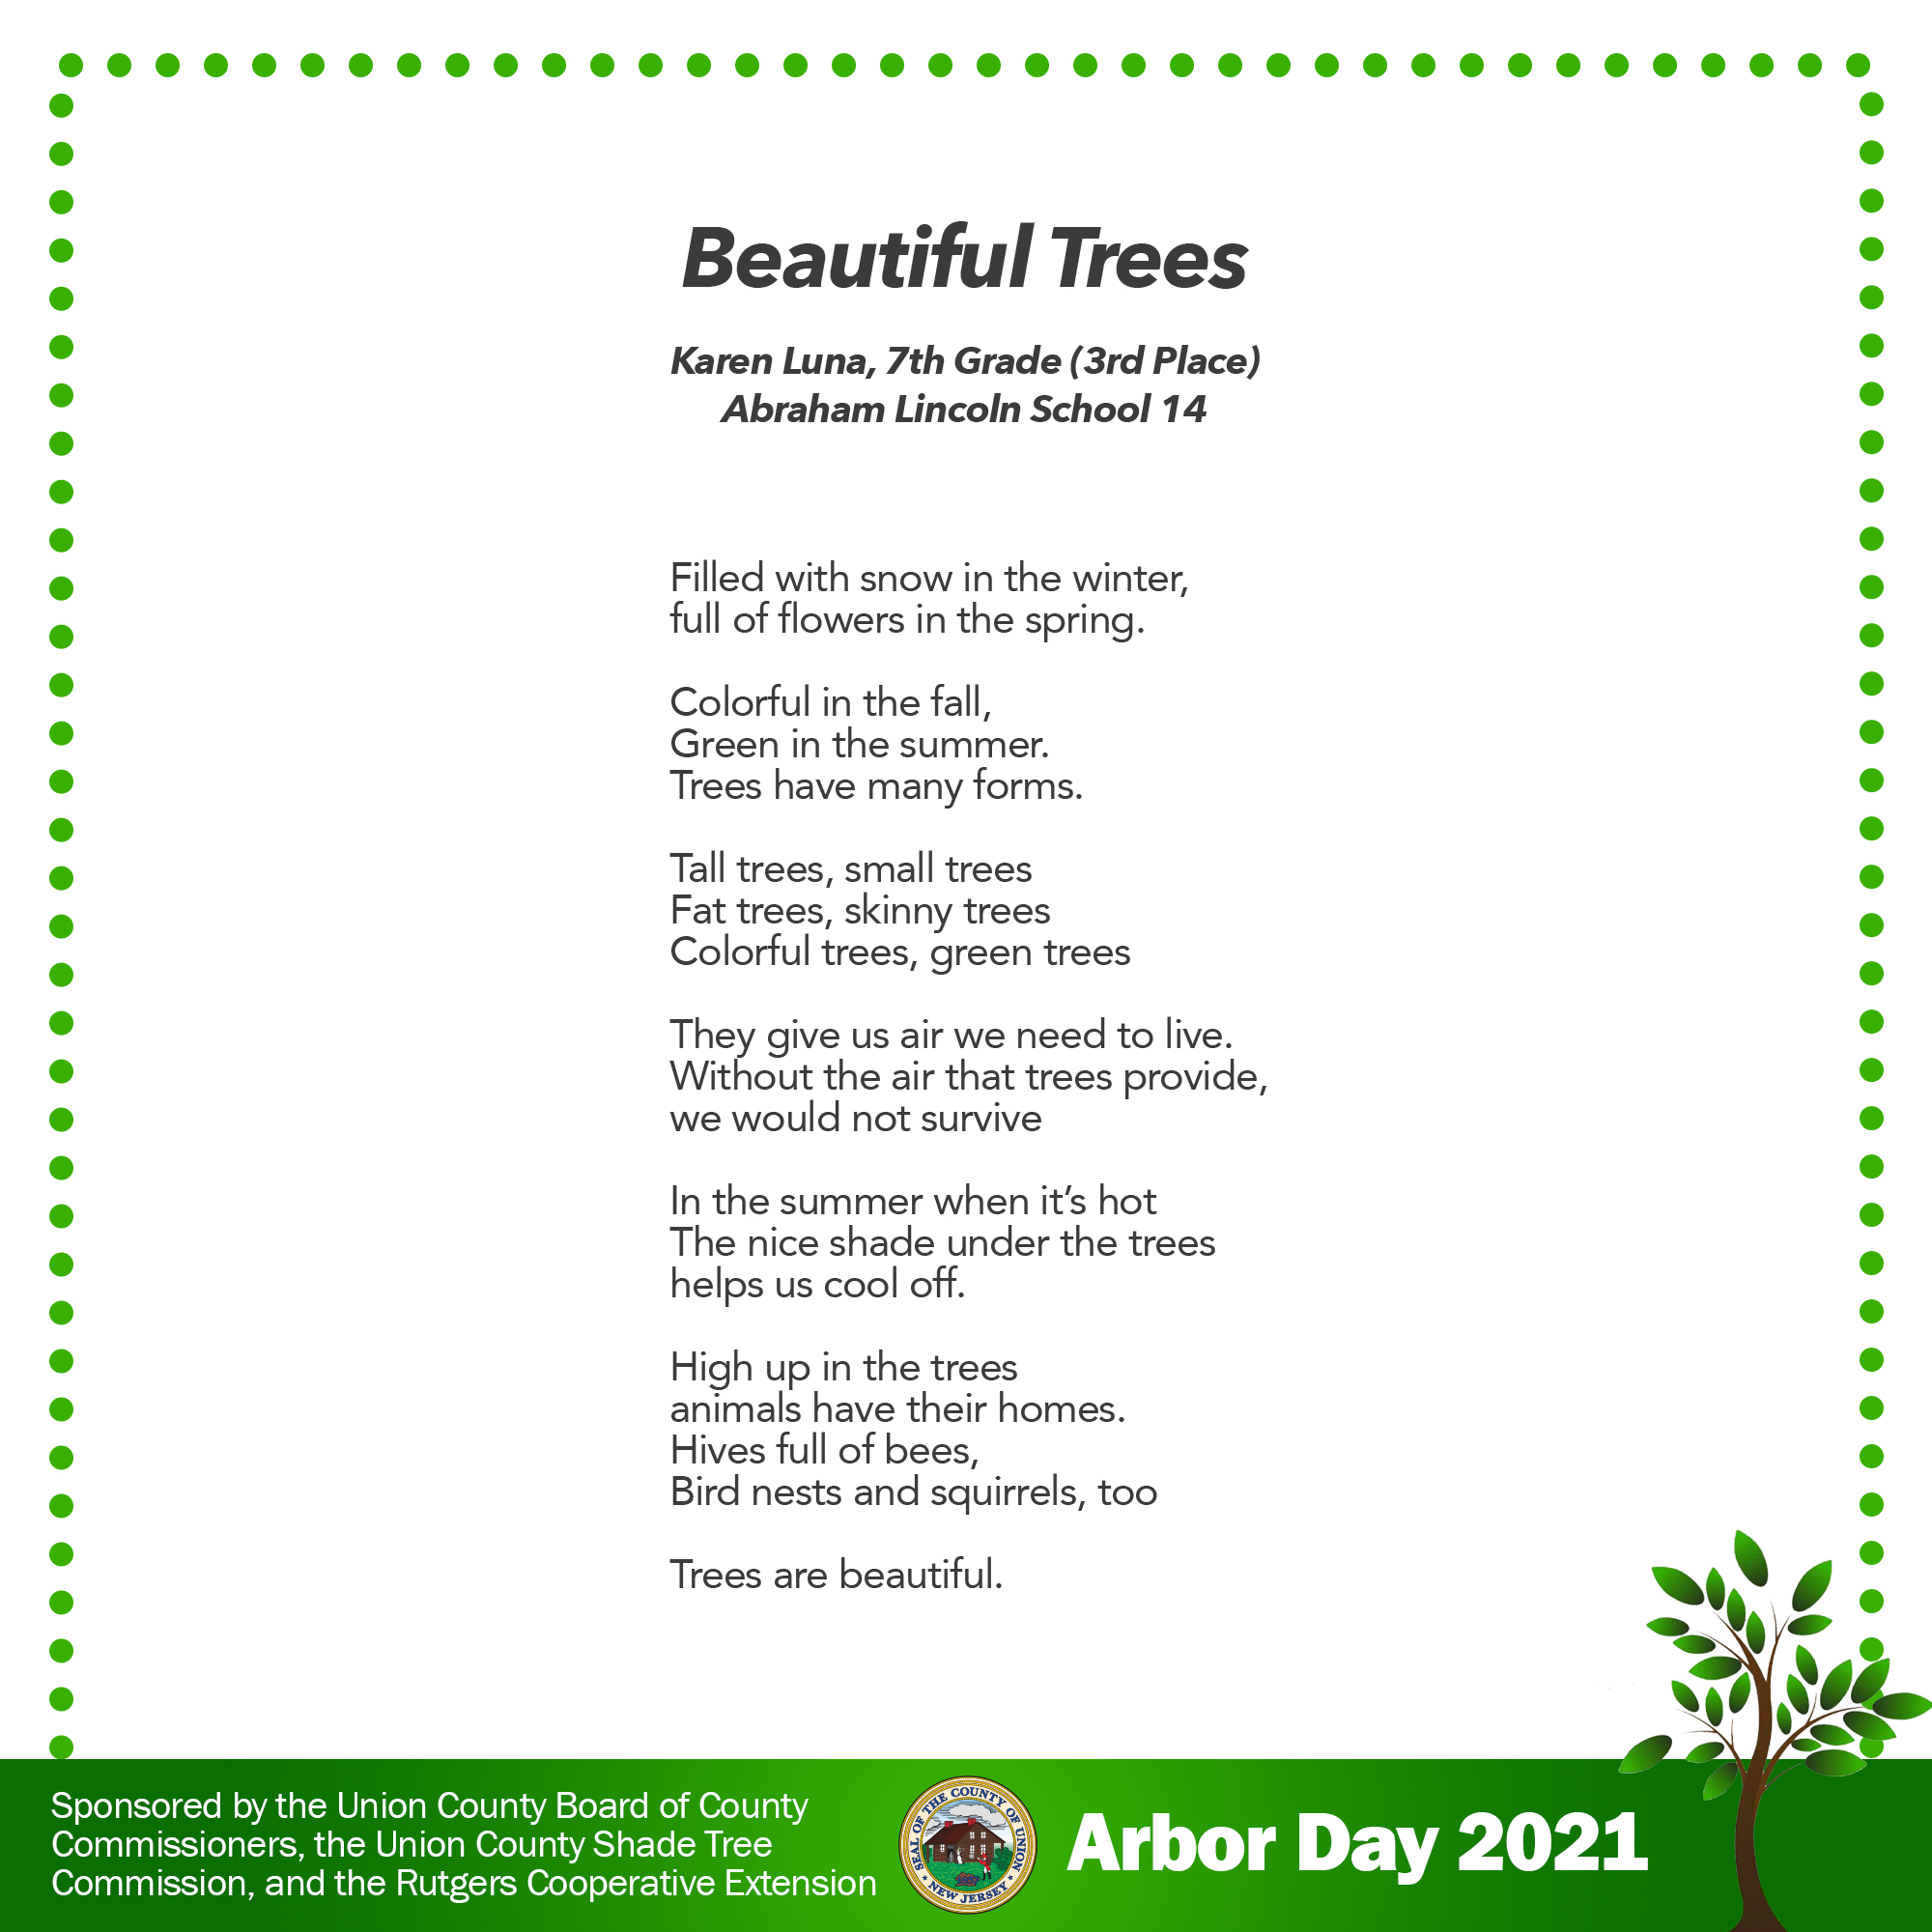 Winners of the 2021 Arbor Day Poetry Contest – County of Union, New Jersey